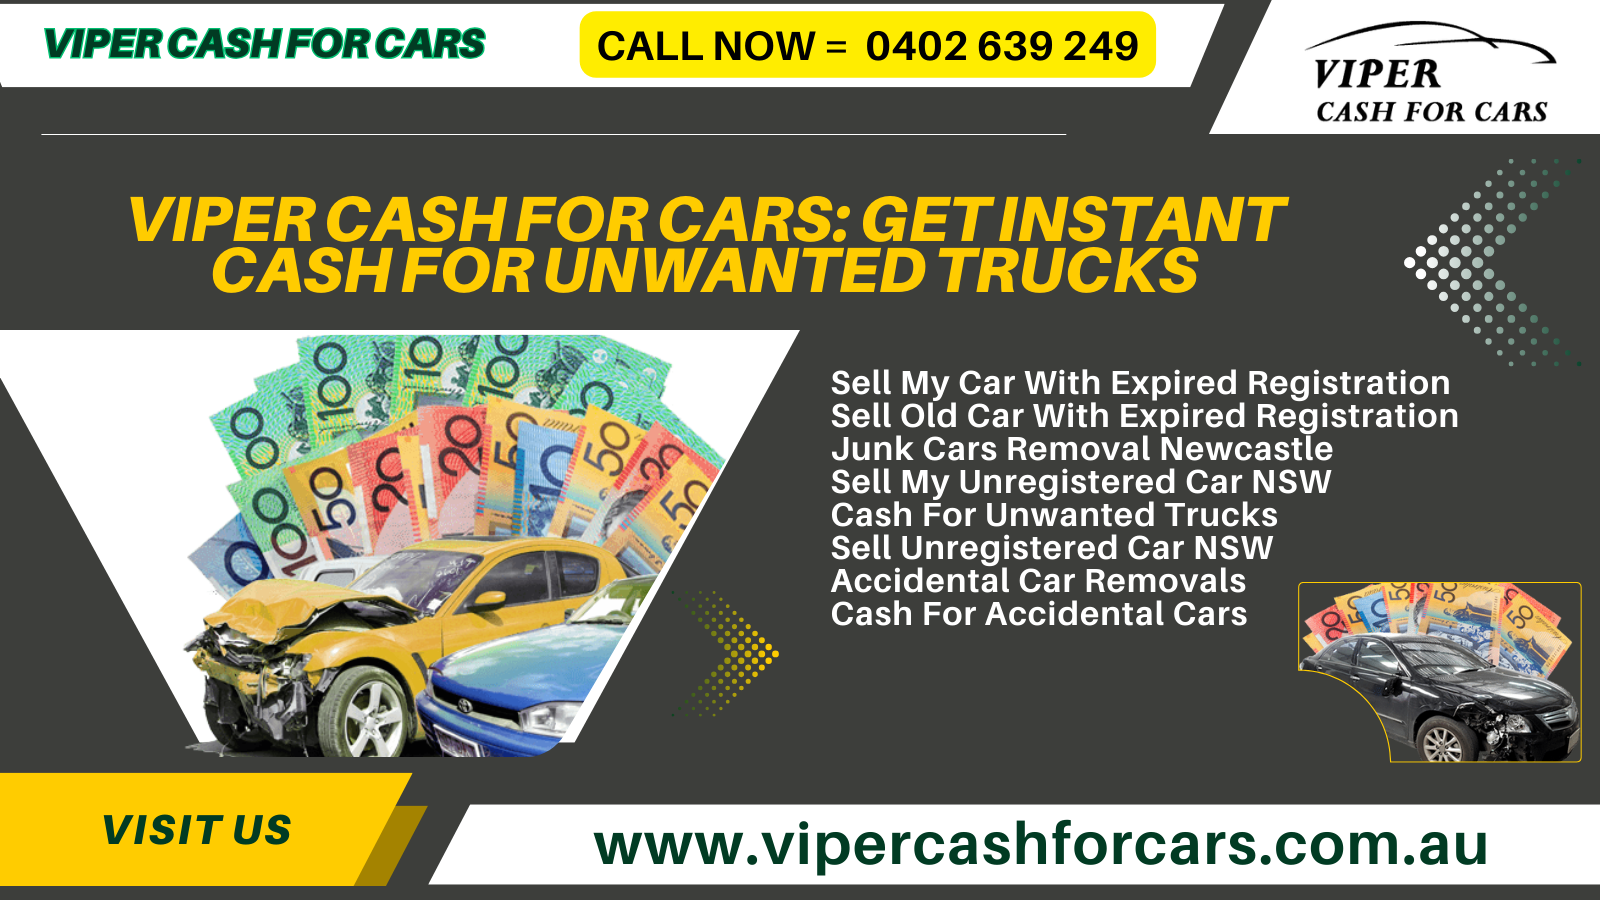 Viper Cash For Cars: Get Instant Cash For Unwanted Trucks